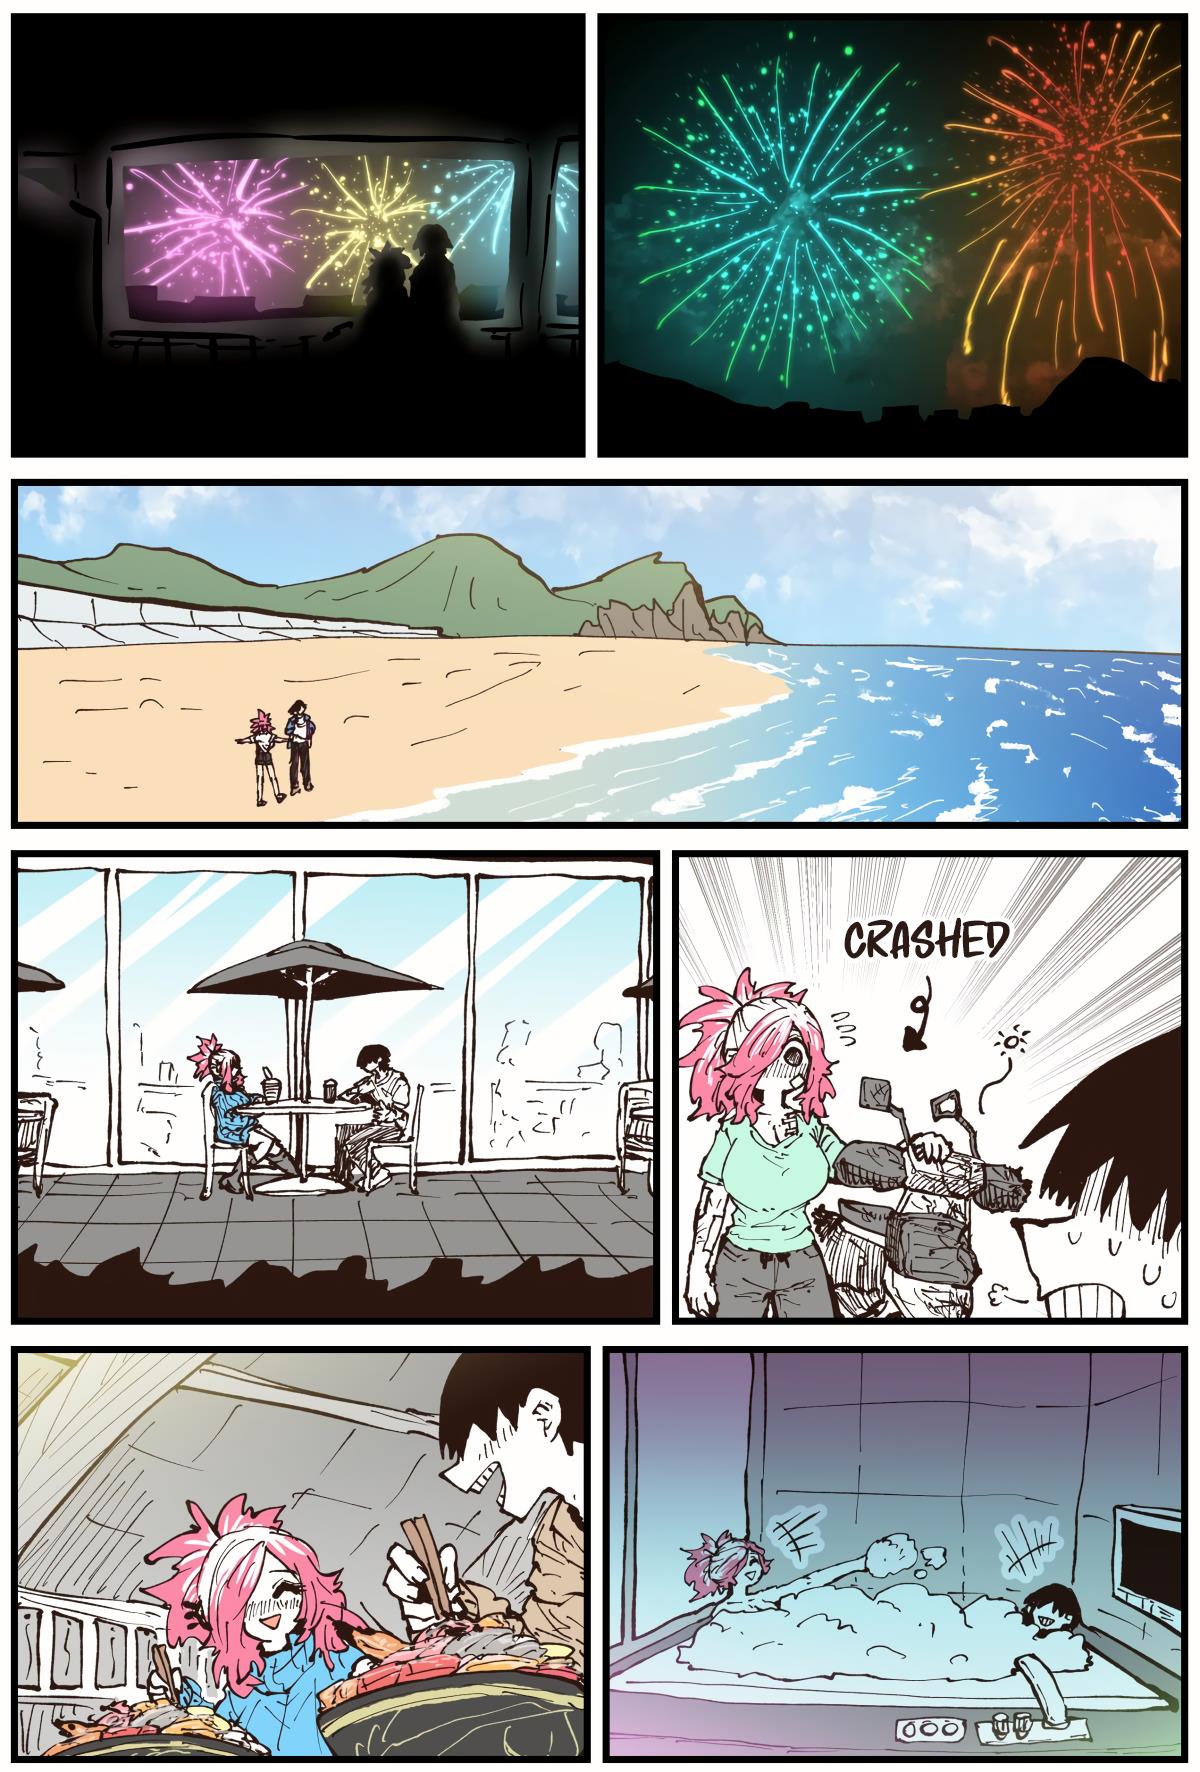 When I Returned To My Hometown, My Childhood Friend Was Broken - Page 2